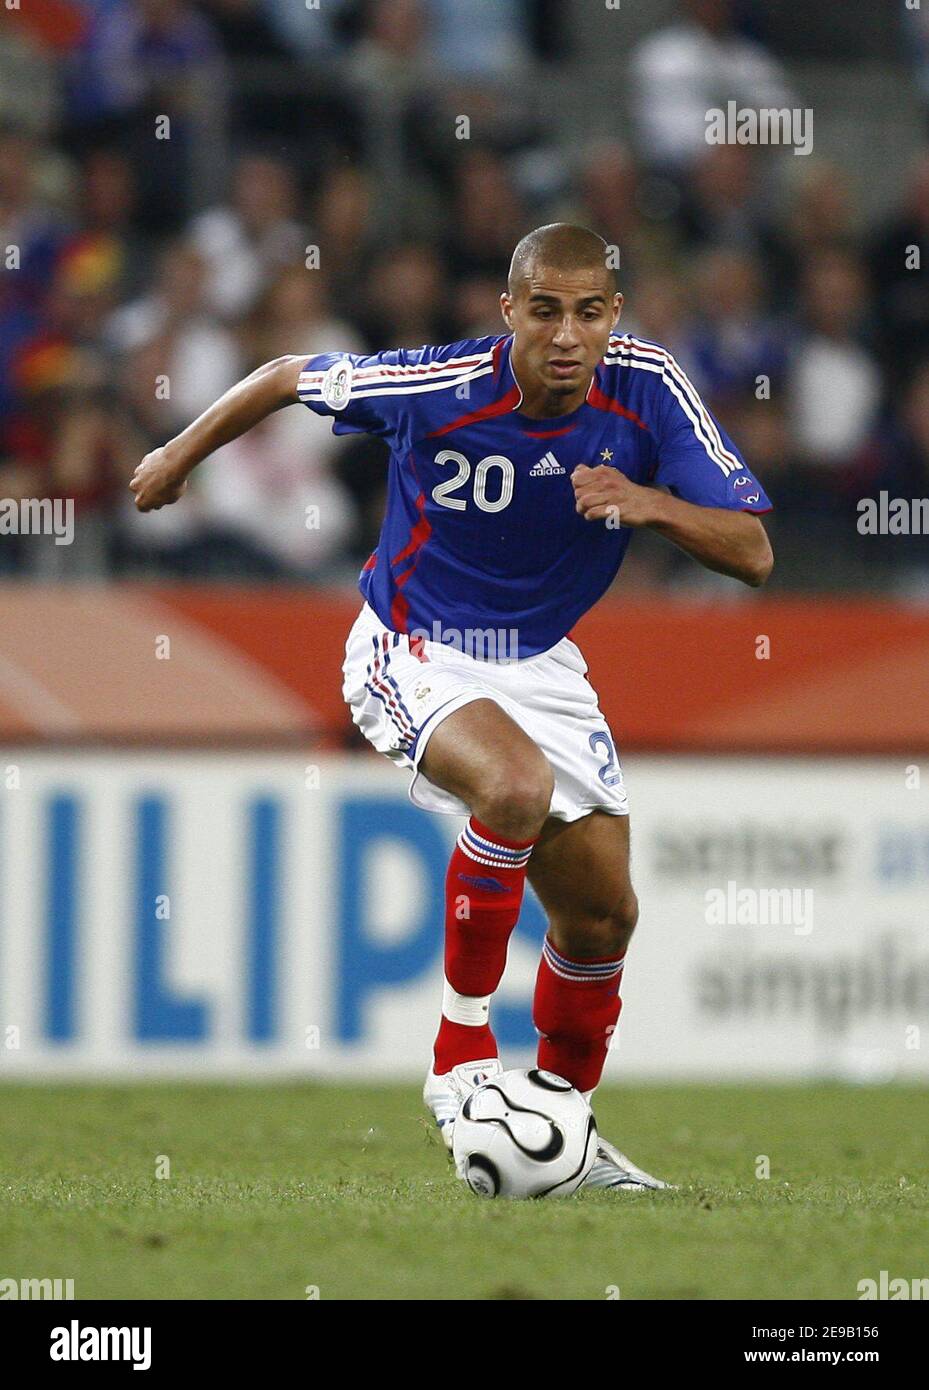 France's David Trezeguet in action during the 2006 FIFA World Cup-Group G,  France vs Togo, in Cologne, Germany, on June 23, 2006. France won 2-0.  Photo by Gouhier-Hahn-Orban/Cameleon/ABACAPRESS.COM Stock Photo - Alamy